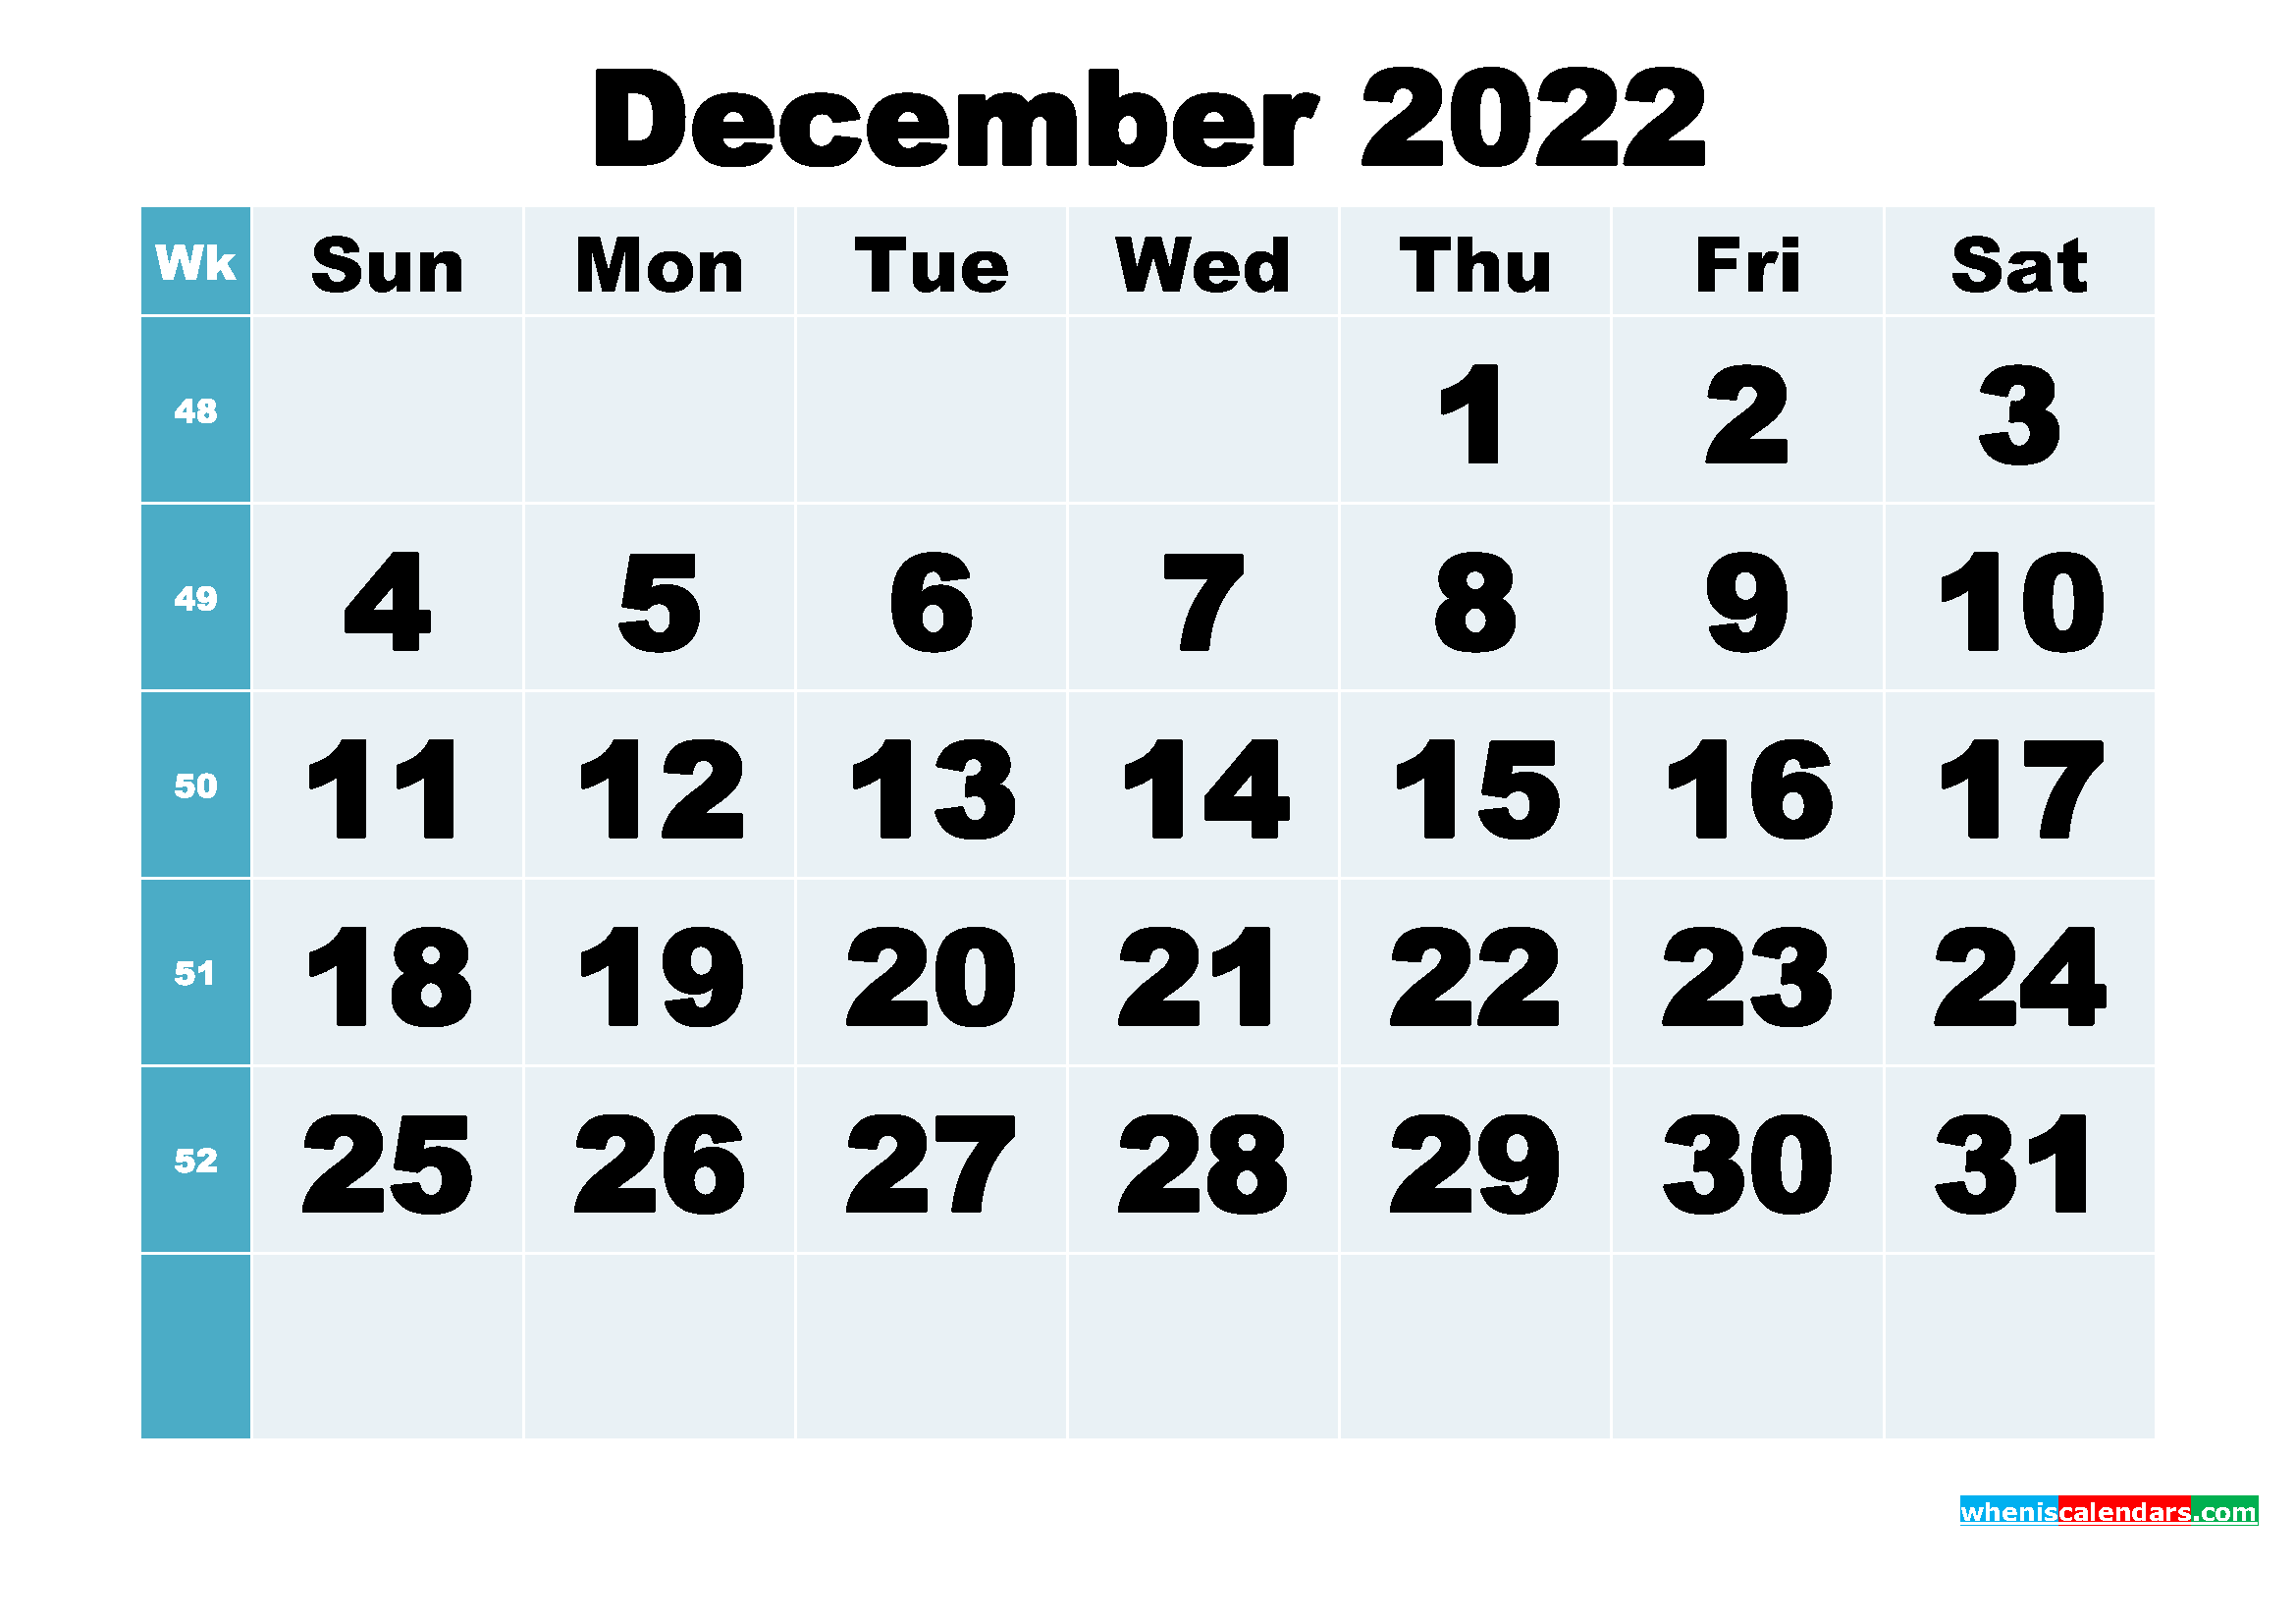 How Many Months To 30th December 2022